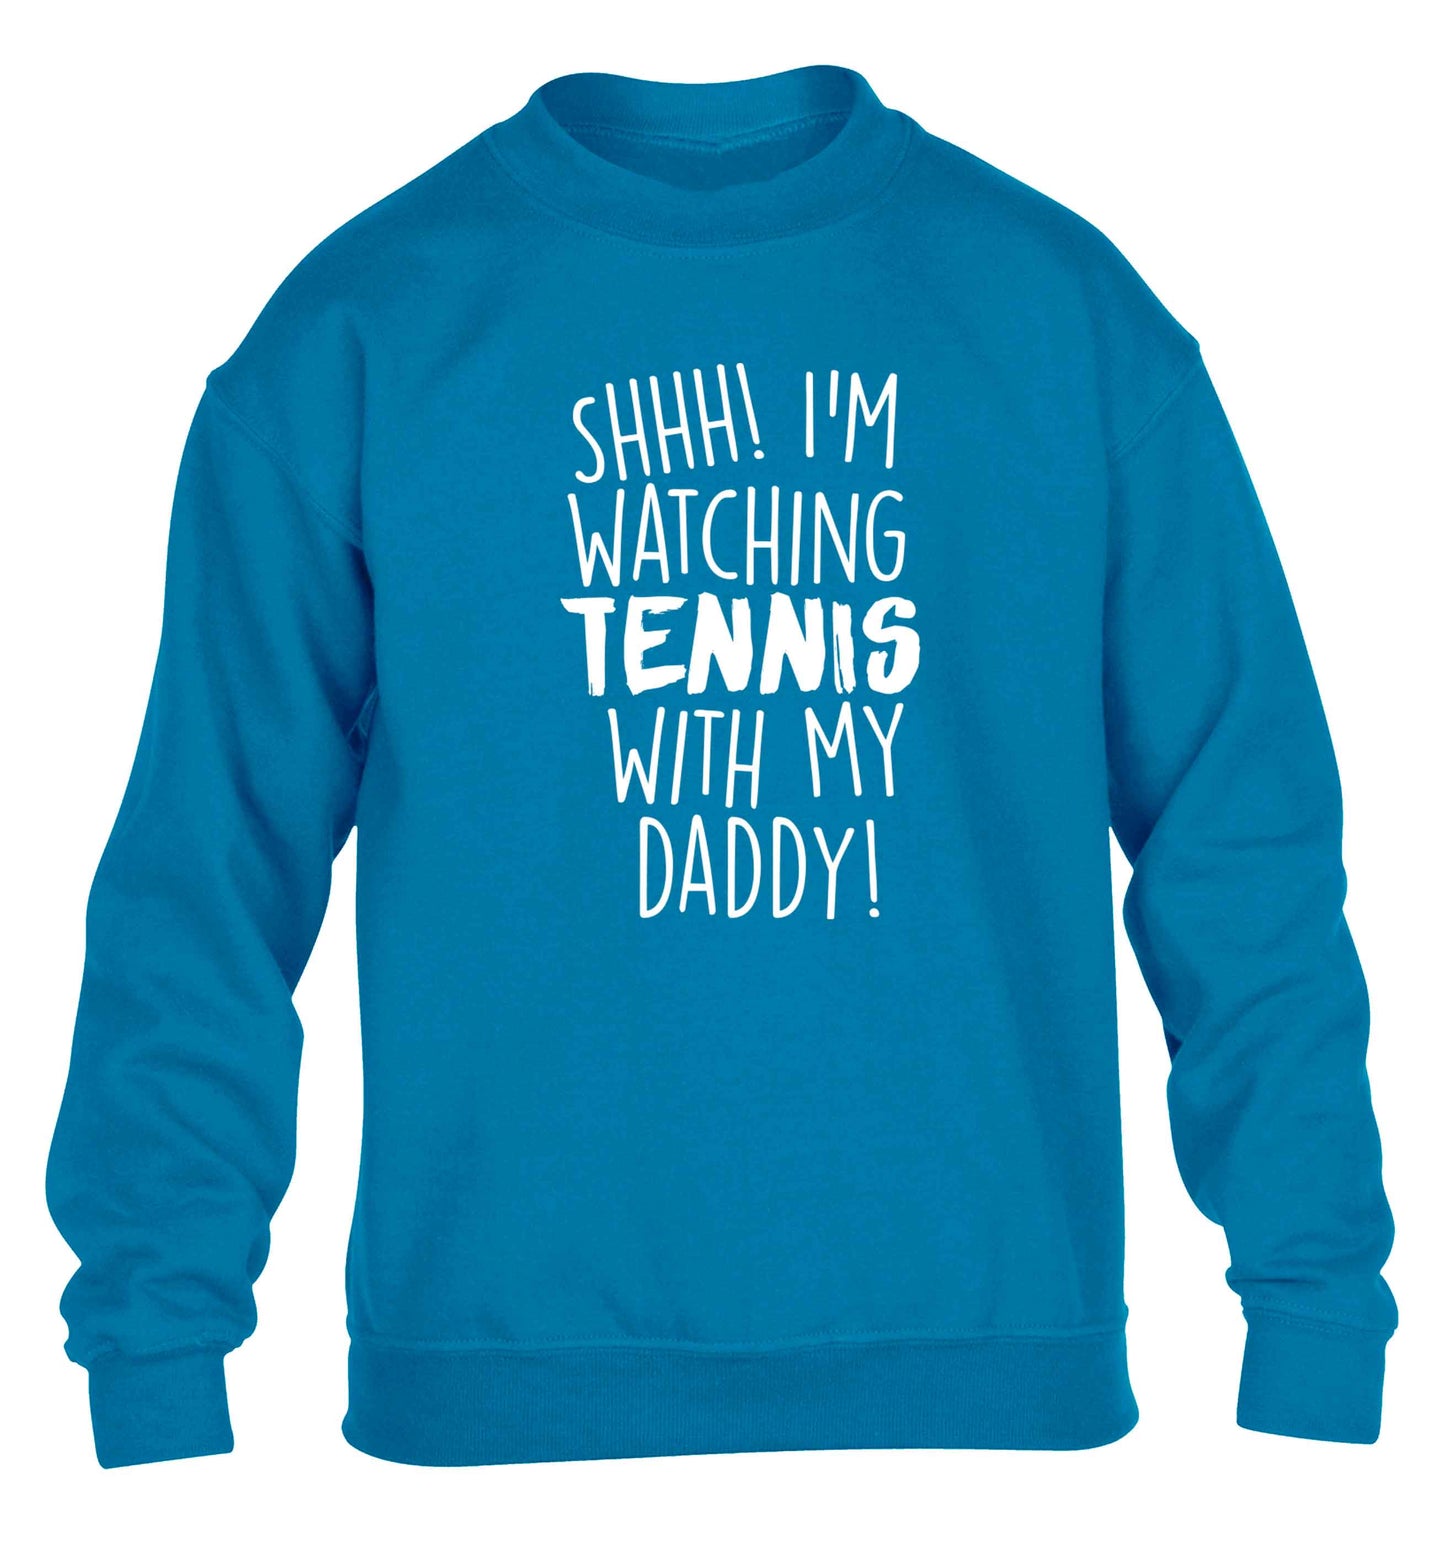 Shh! I'm watching tennis with my daddy! children's blue sweater 12-13 Years